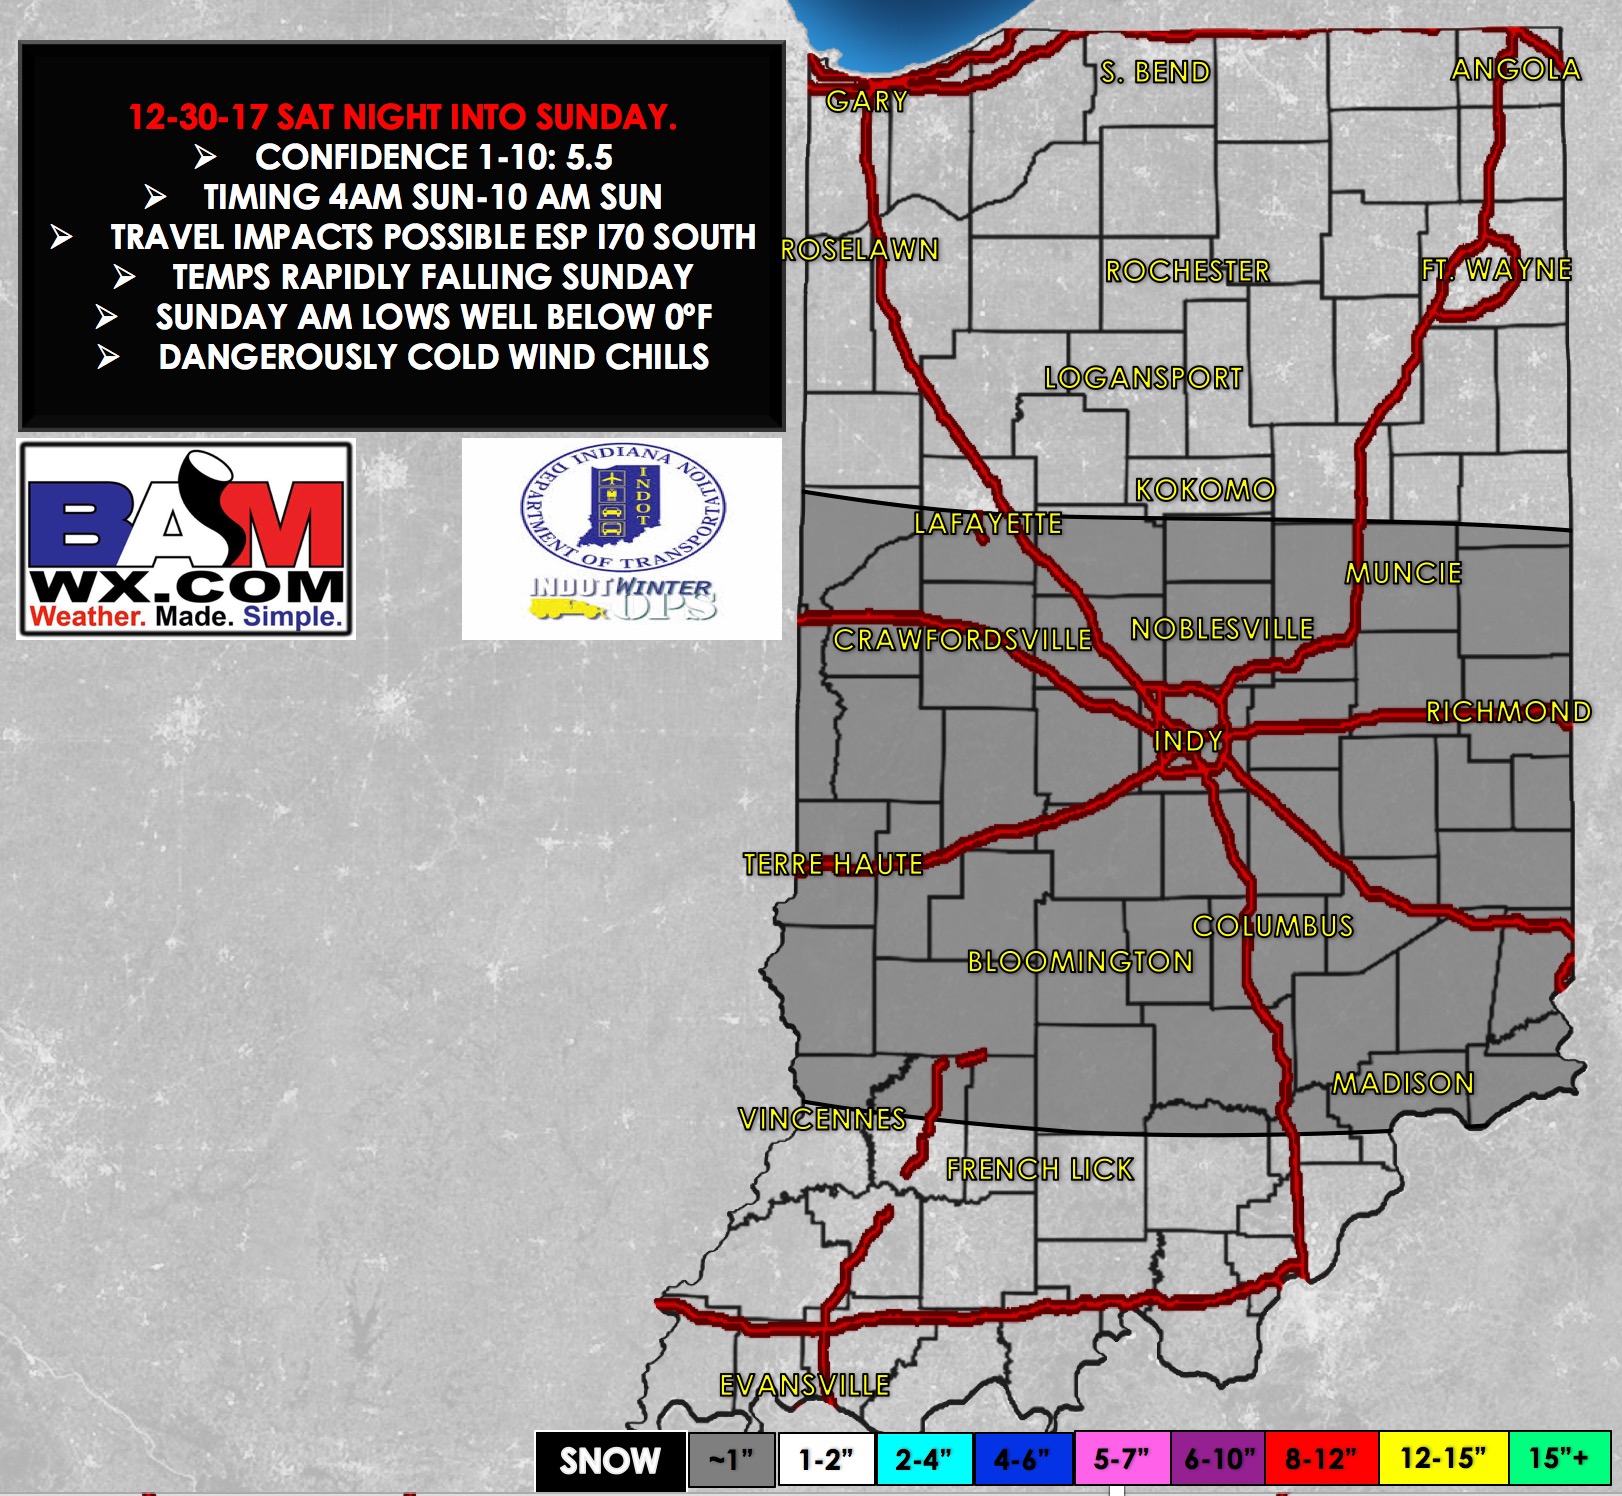 12-30-17 Indiana/INDOT Update: Chance for light snow accumulations late tonight/early tomorrow! B.